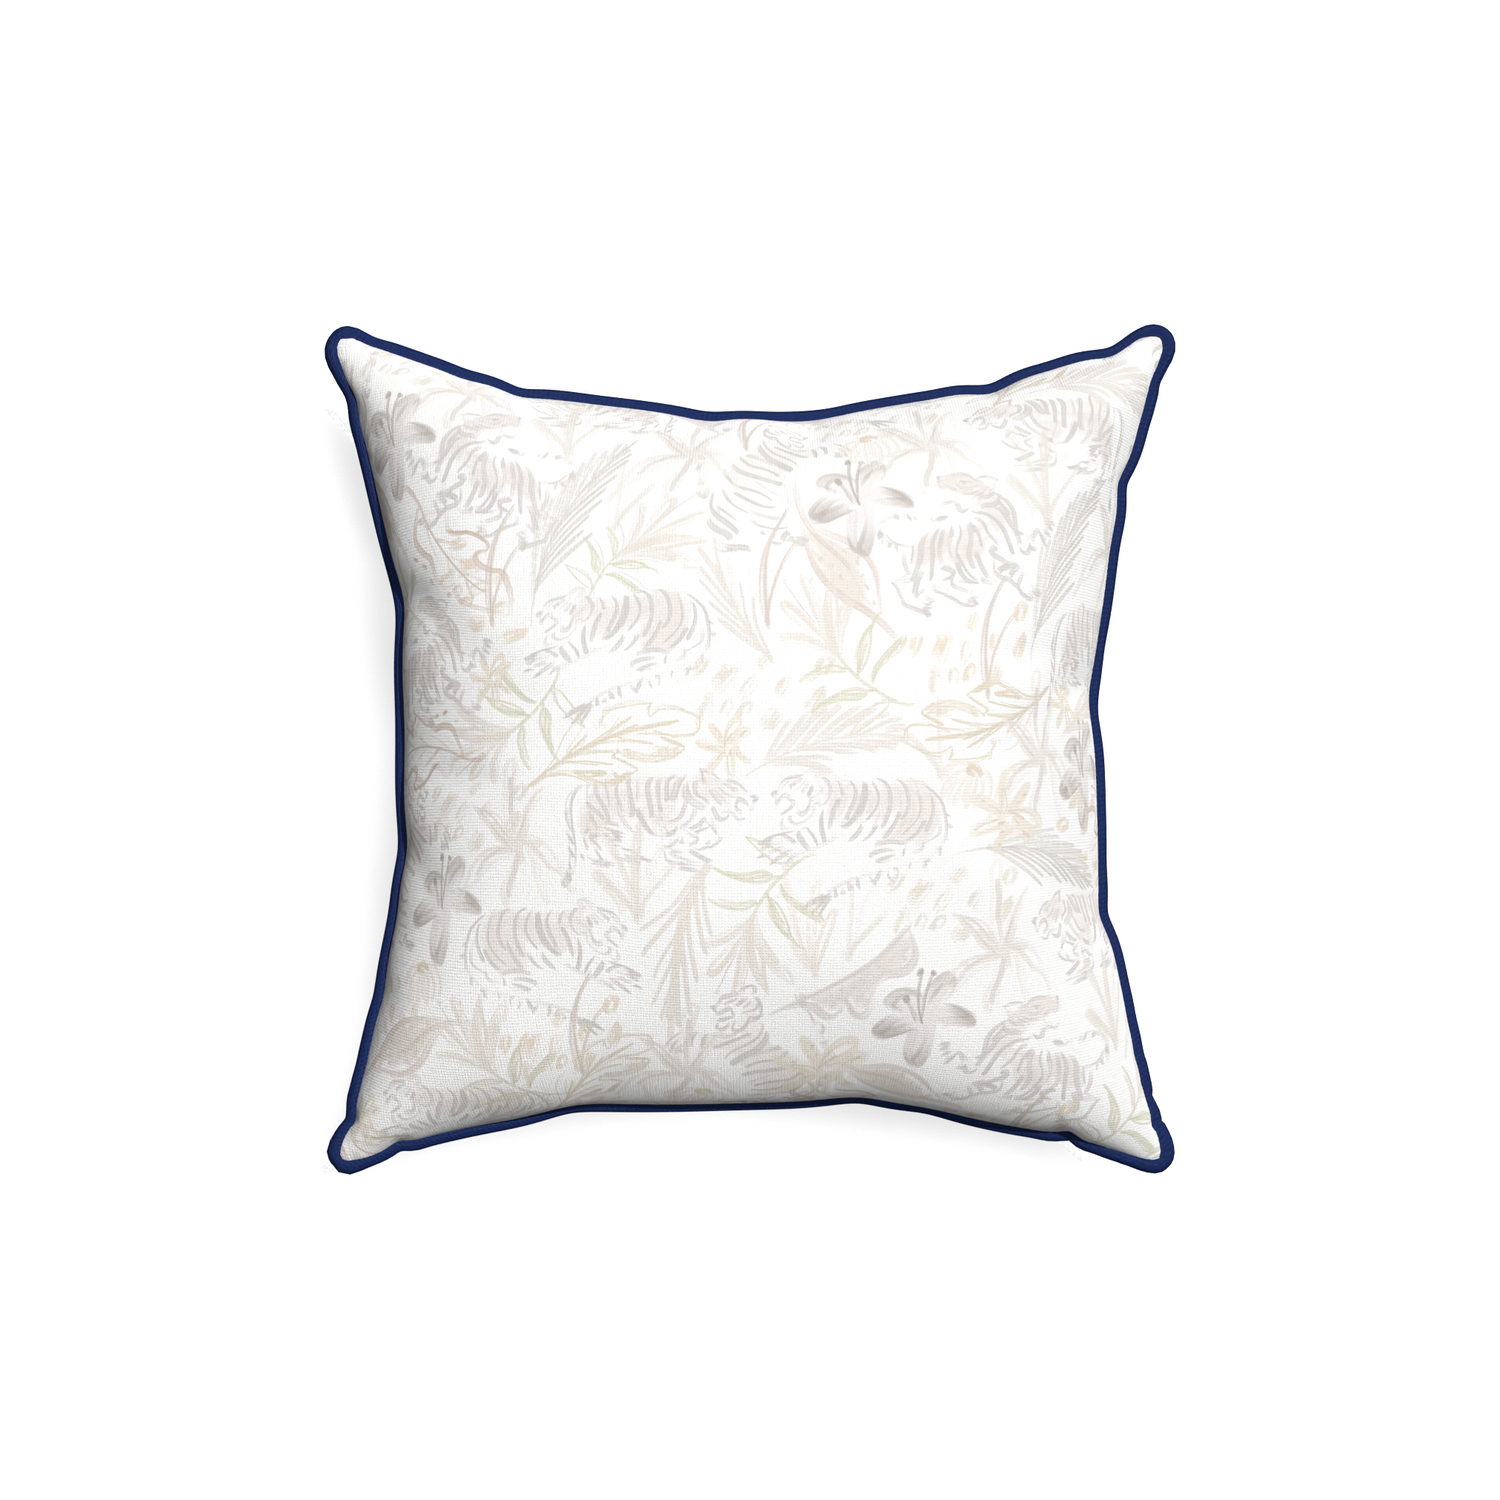 18-square frida sand custom pillow with midnight piping on white background